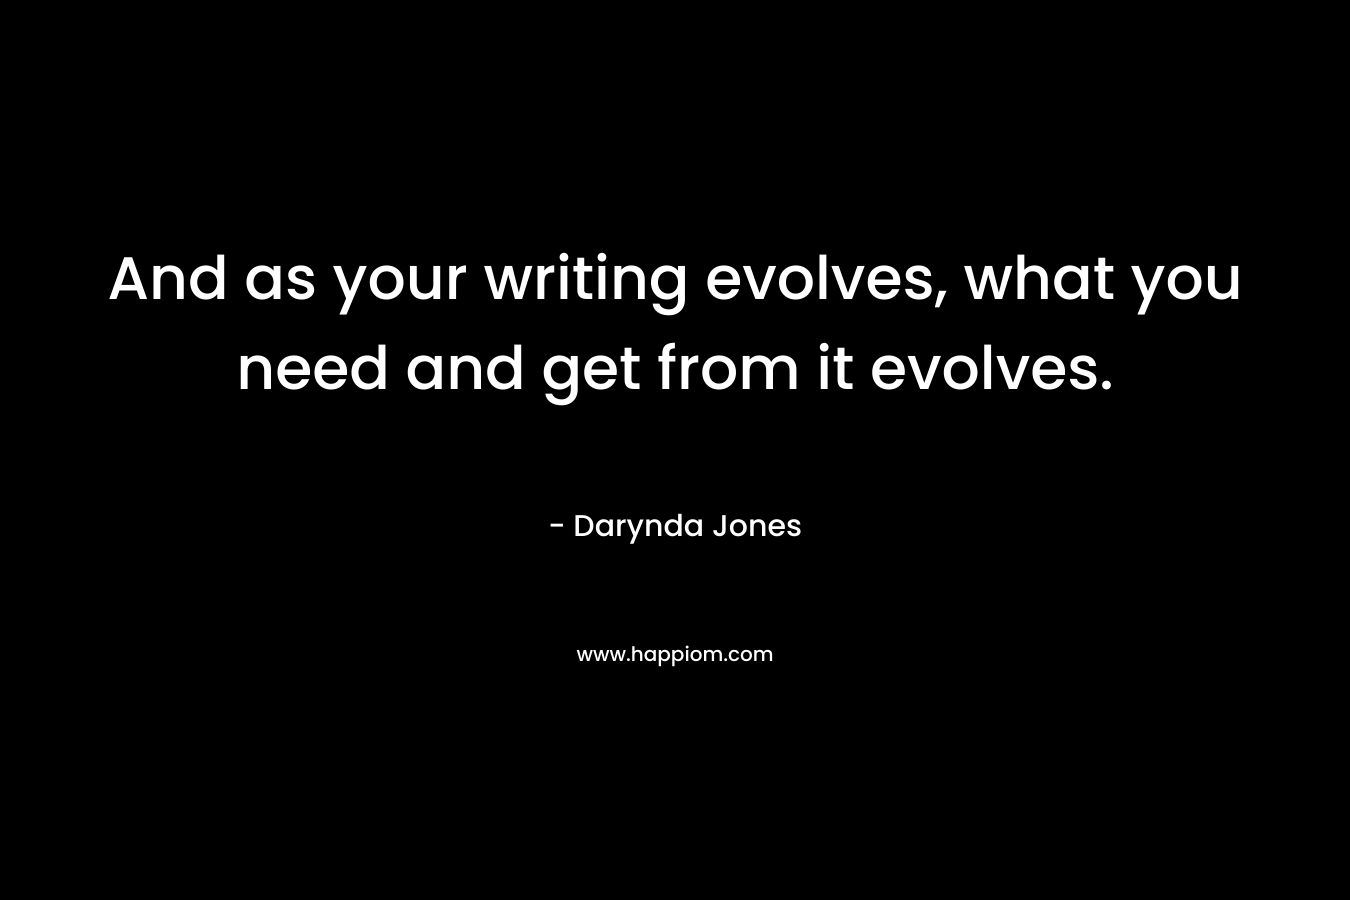 And as your writing evolves, what you need and get from it evolves.